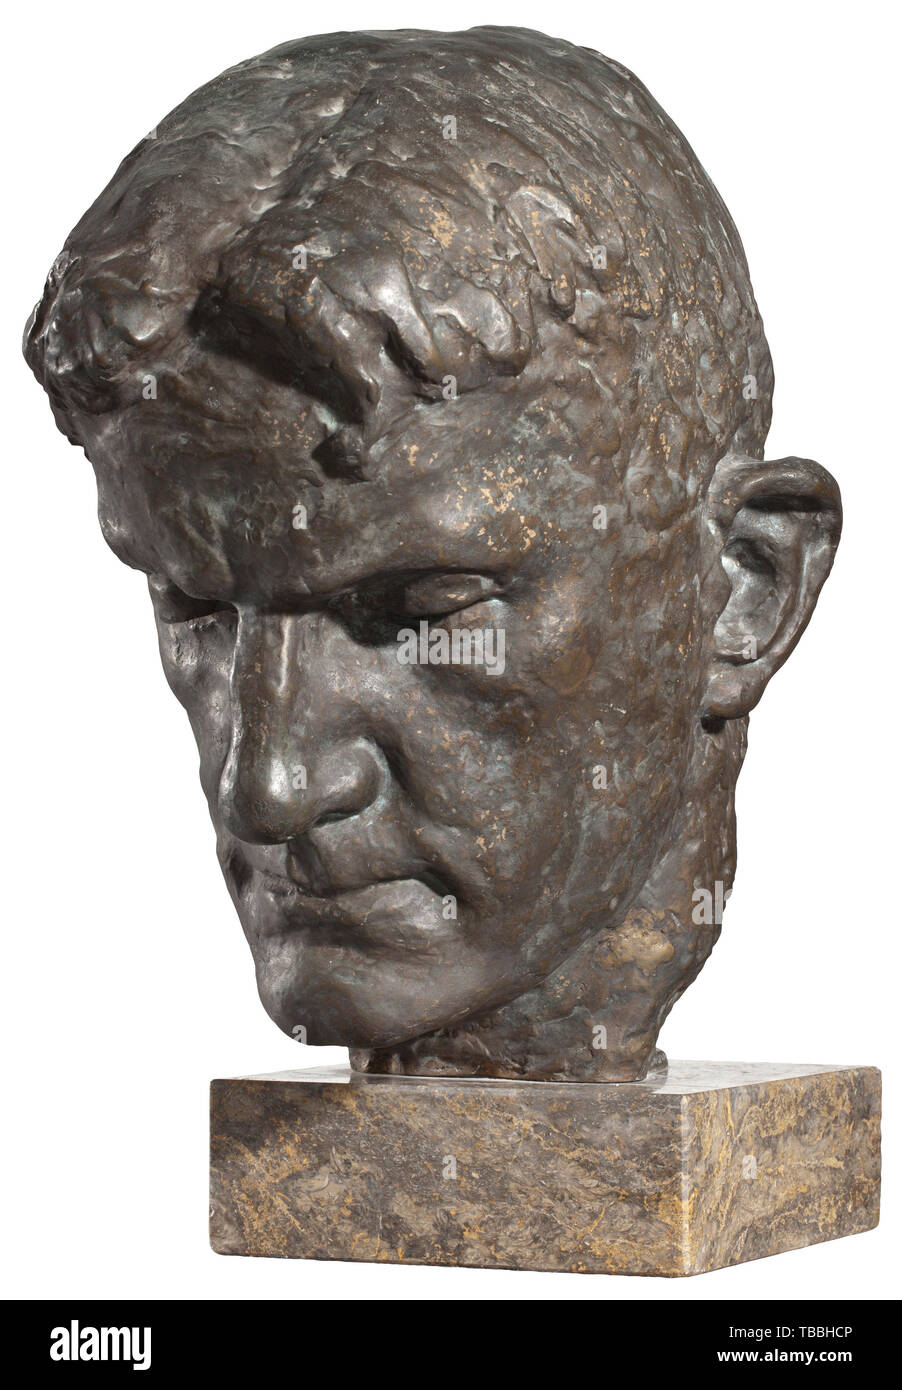 Josef Thorak (1889 - 1952) - a life-sized bronze portrait bust of Ernst 'Putzi' Hanfstaengl, dating 1934 Bronze with beautiful dark brown patina. Signed in the nape of the neck 'J. Thorak'. Height 35 cm. On a marble base, total height 42.5 cm. Apart from Arno Breker, Josef Thorak was the most important sculptor of the Third Reich. Before the war, Hitler had a huge studio built for him in Baldham near Munich acco 20th century, Editorial-Use-Only Stock Photo